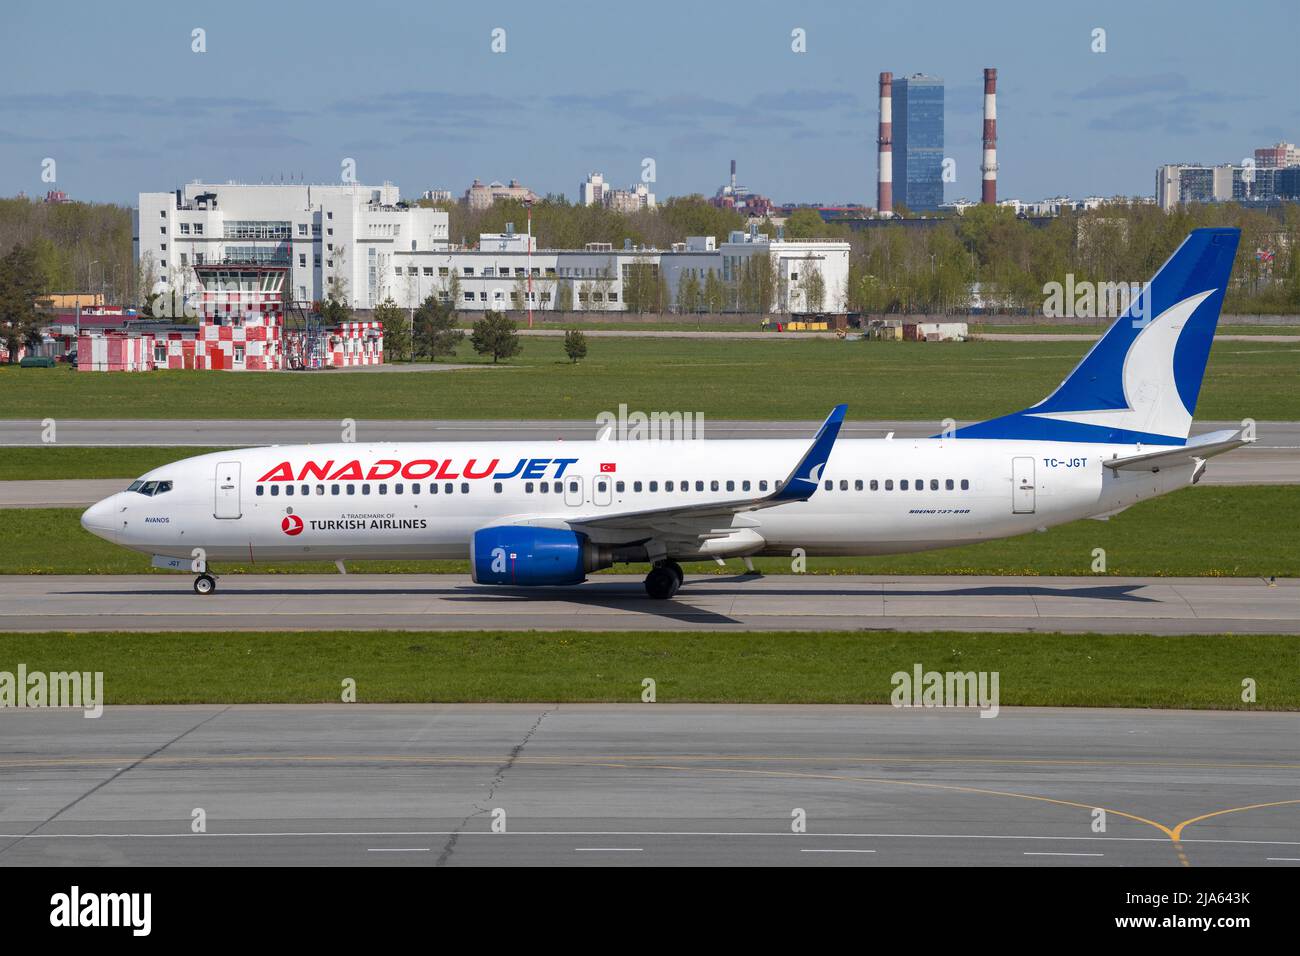 SAINT PETERSBURG, RUSSIA - MAY 20, 2022: The Boeing 737-800 (TC-JGT) of Anadolu Jet Airline arrived on Pulkovo Airport Stock Photo